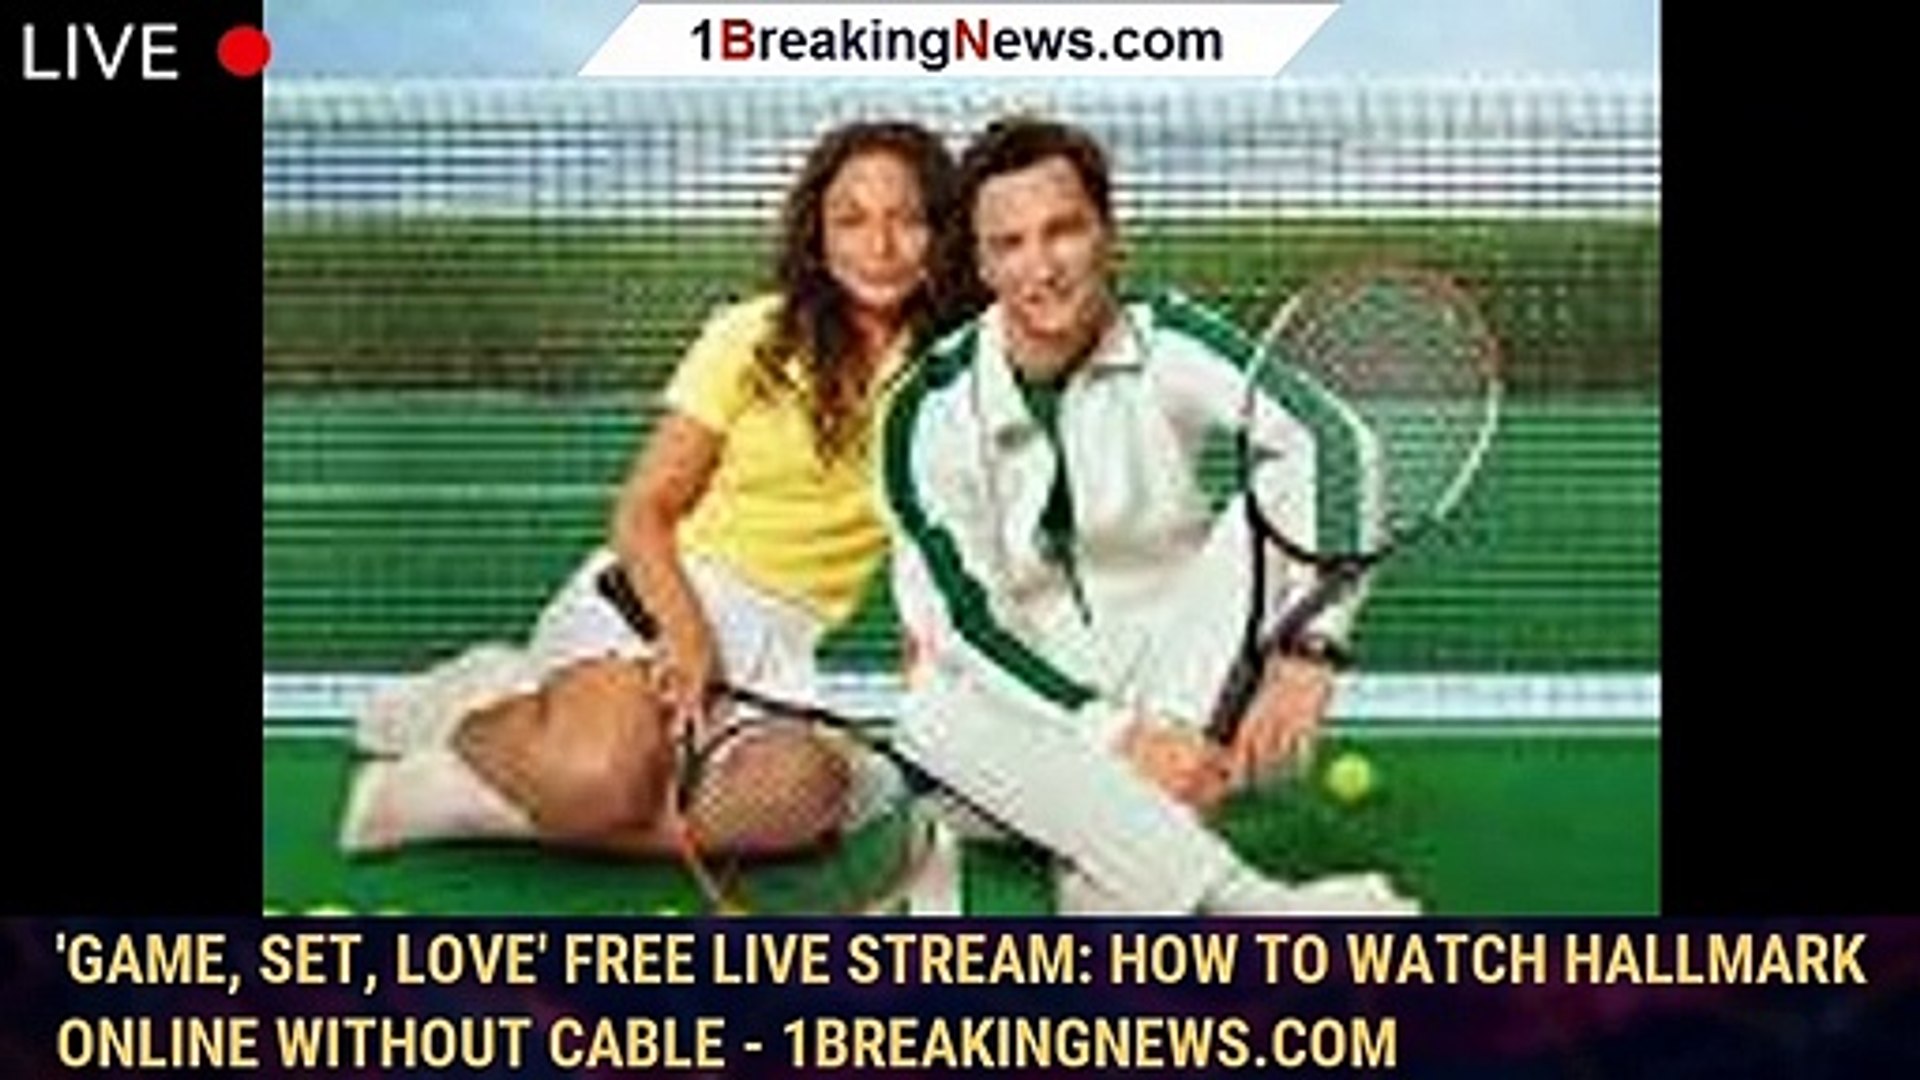 Game, Set, Love free live stream How to watch Hallmark online without cable - 1breakingnews